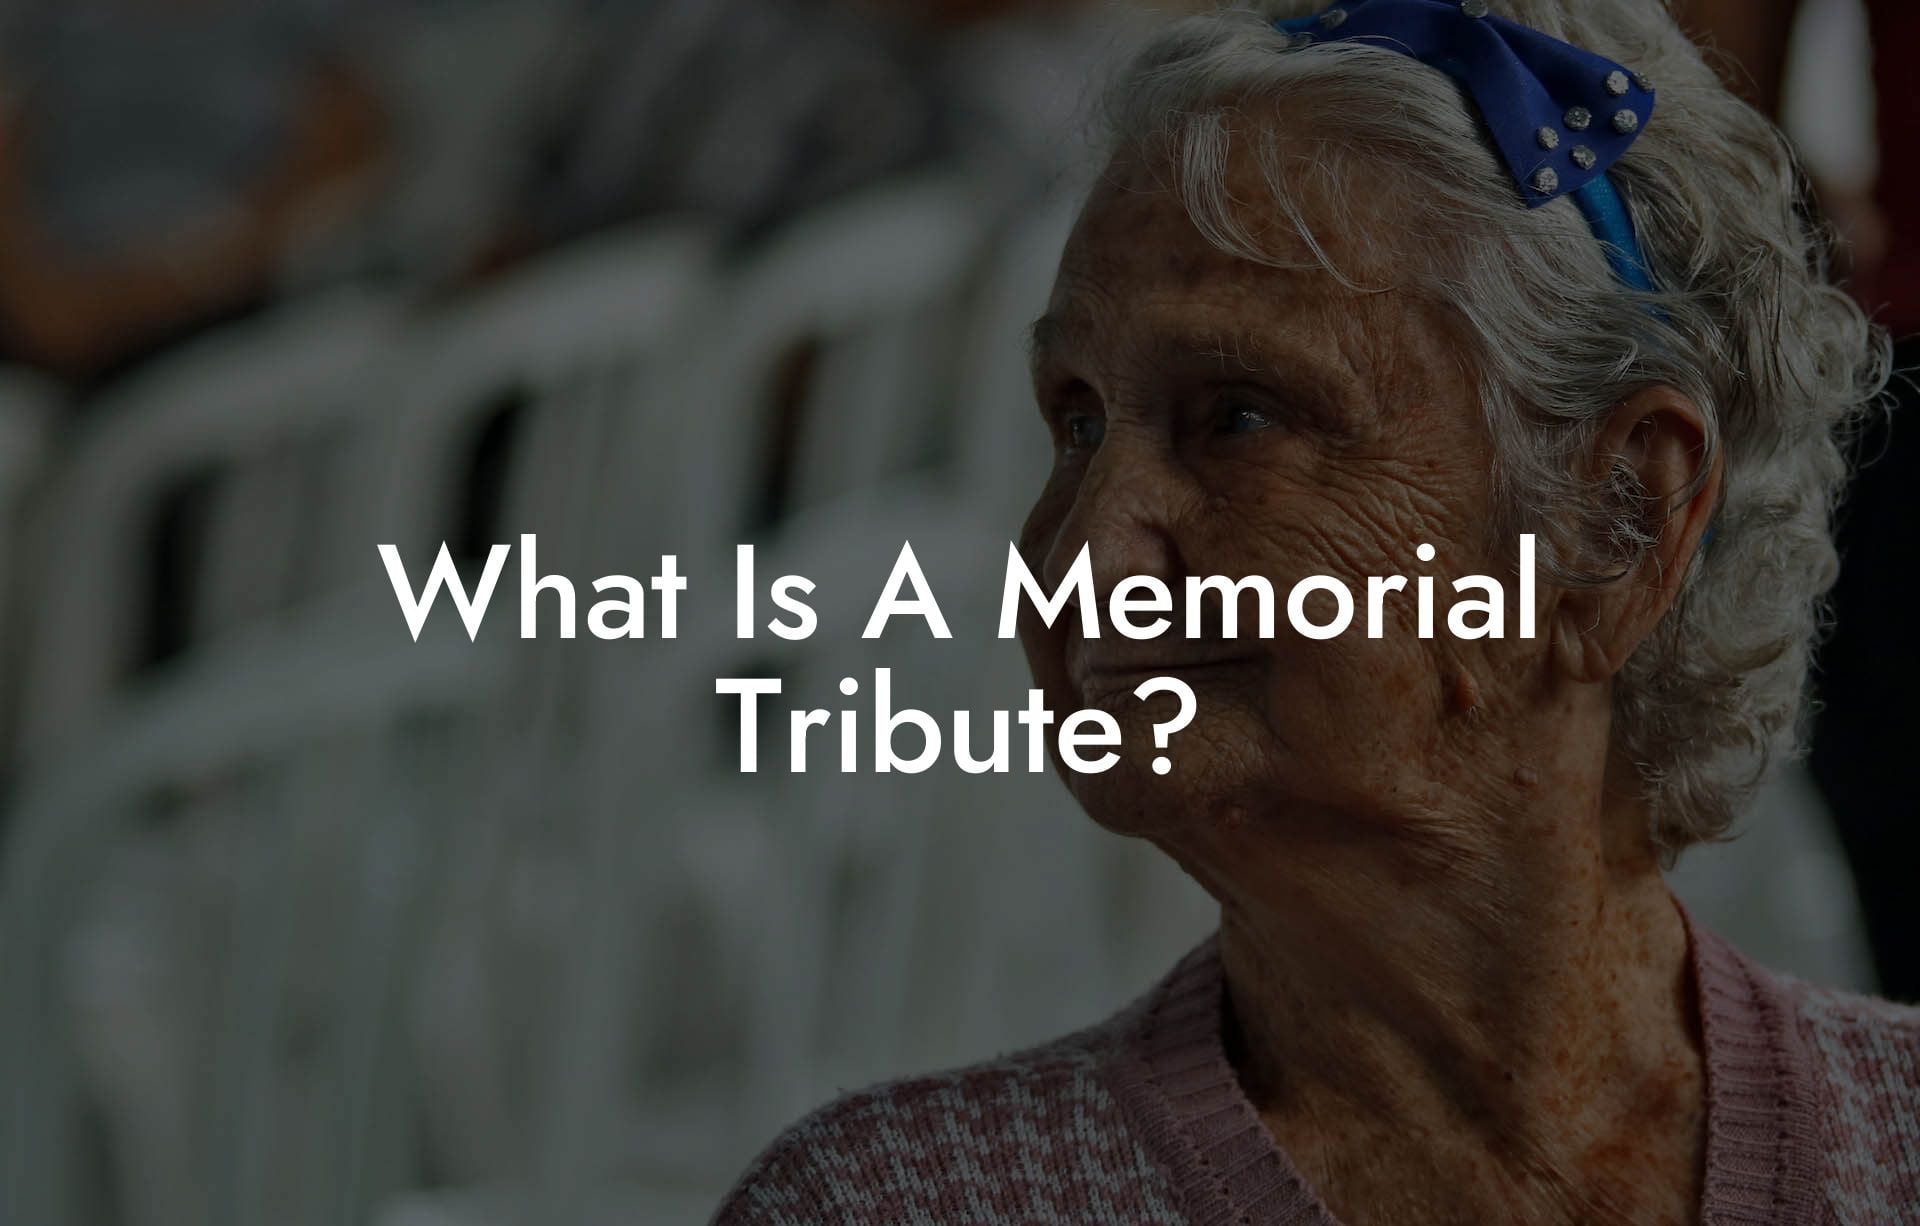 What Is A Memorial Tribute?